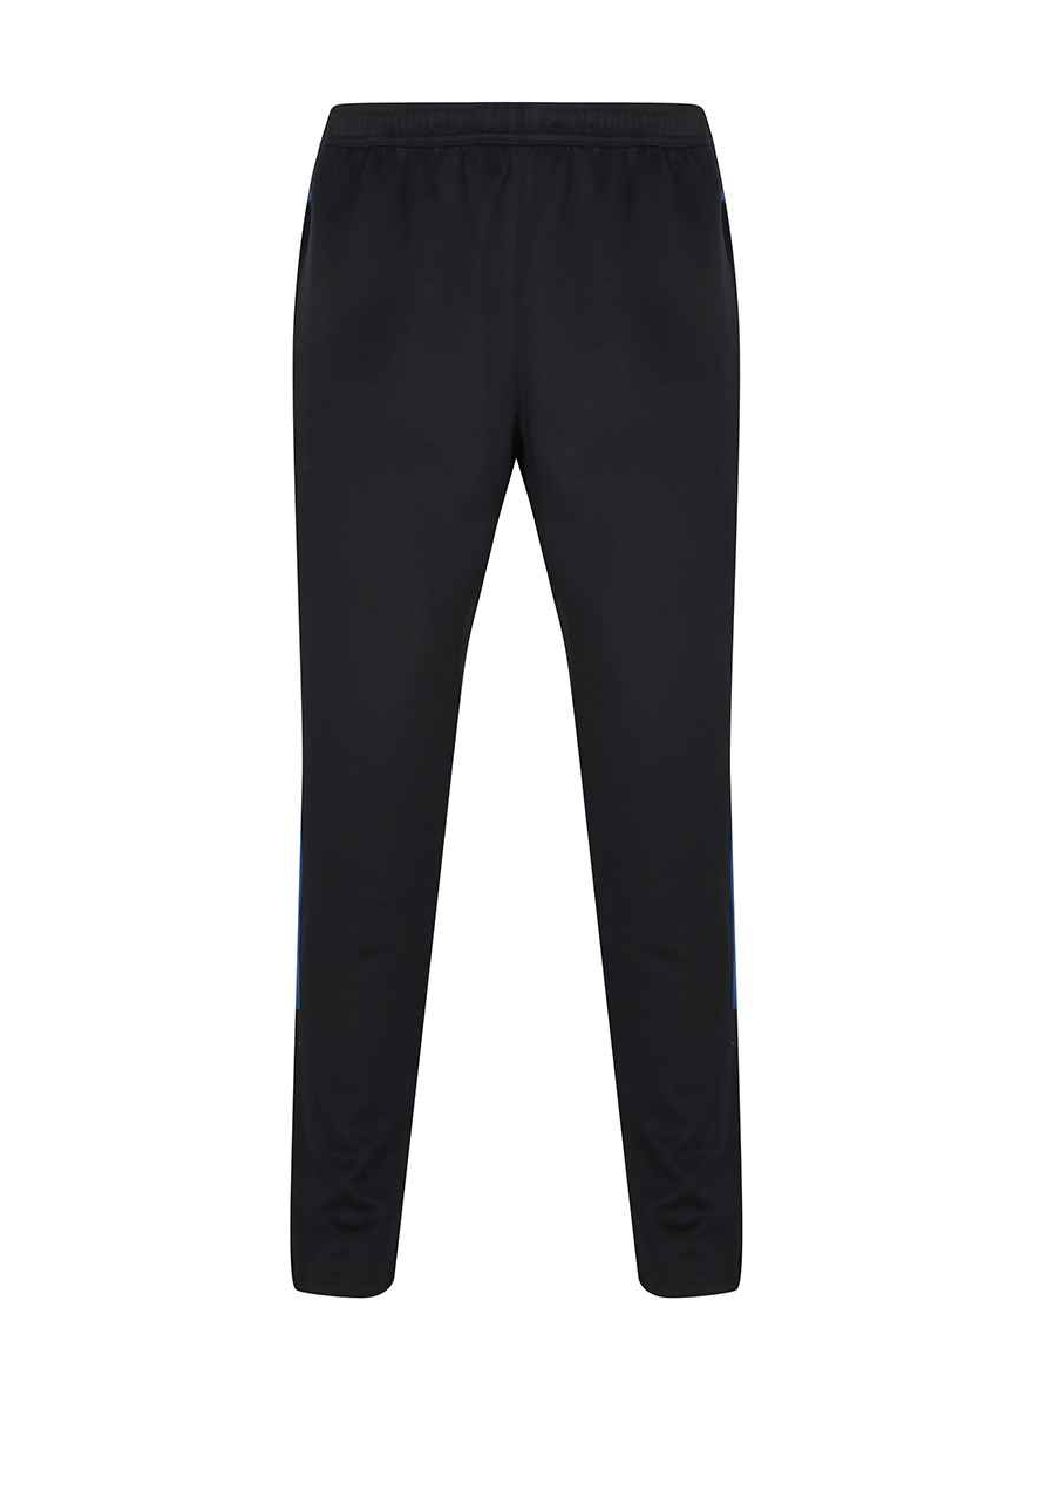 Black / Royal blue tracksuit bottoms - Undisputed Sports